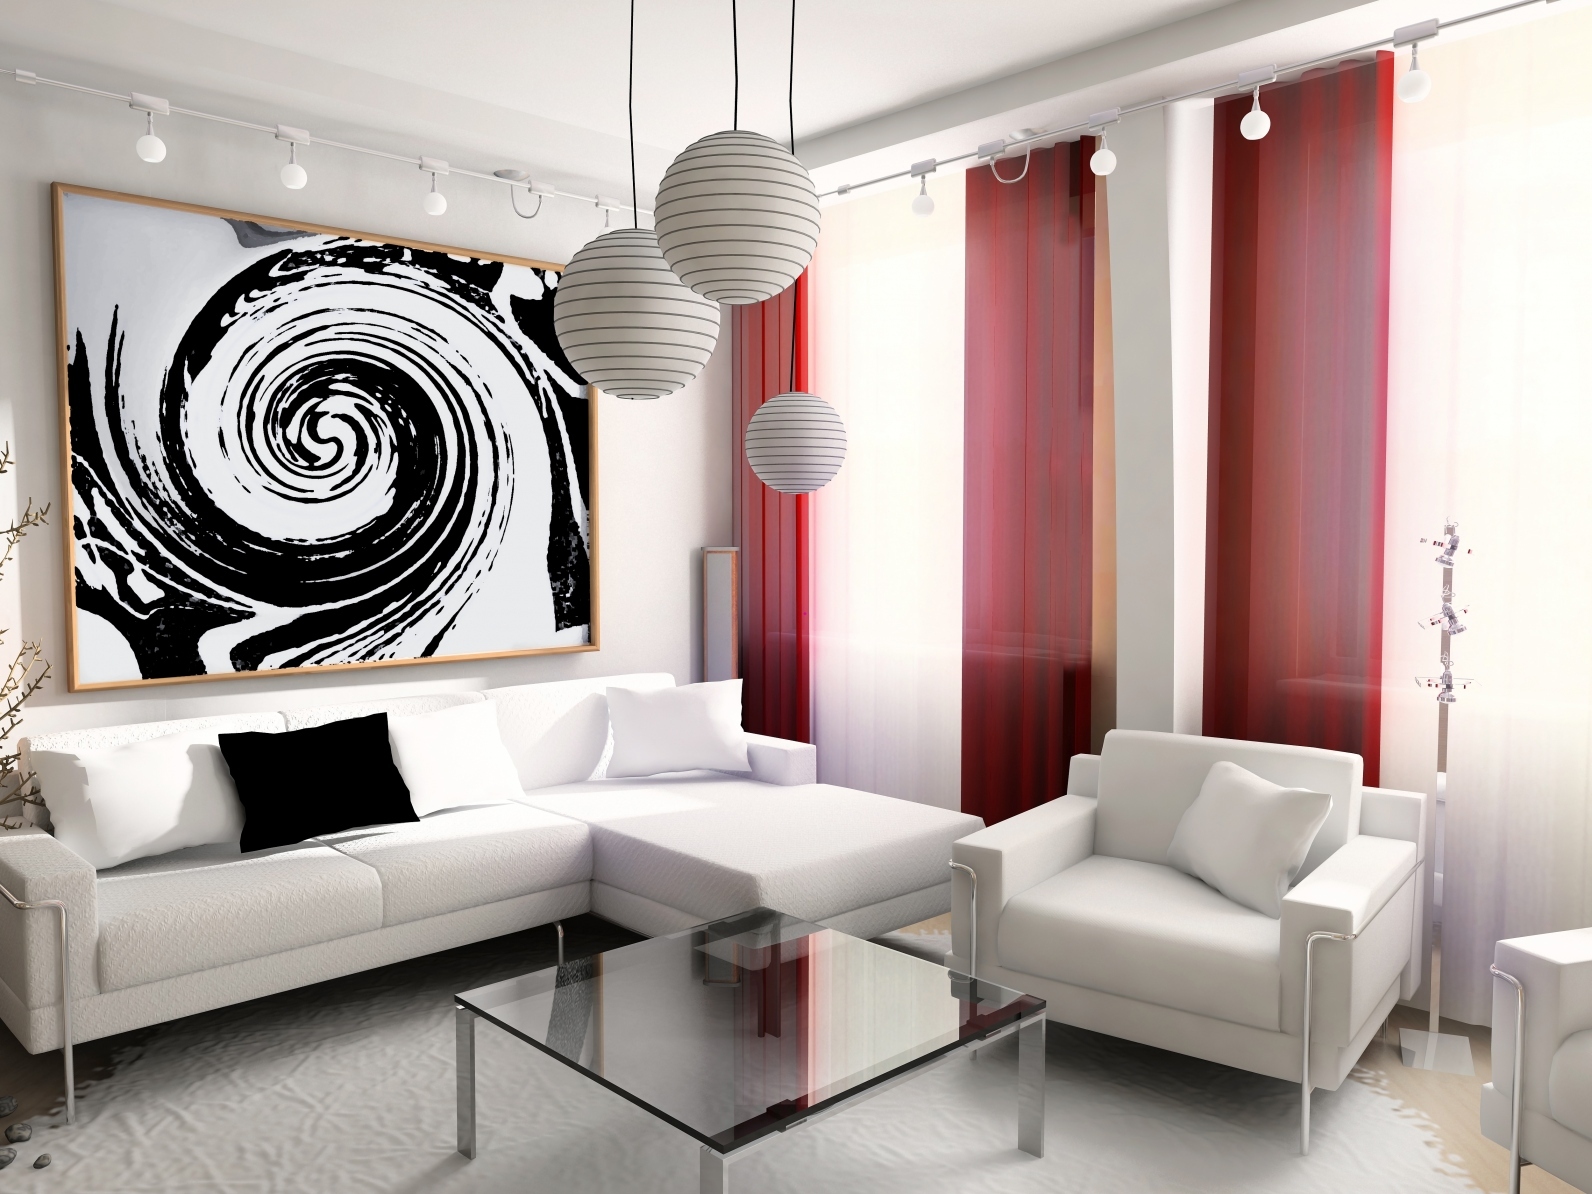 minimalist living room decor "width =" 1592 "height =" 1194 "srcset =" https://mileray.com/wp-content/uploads/2020/05/1588517261_852_Living-Room-Decorating-Ideas-With-Red-And-White-Color-Shade.jpg 1592w, https: // myfashionos .com / wp-content / uploads / 2016/08 / Ã - zhan-Hazirlar5-300x225.jpg 300w, https://mileray.com/wp-content/uploads/2016/08/Ã–zhan-Hazirlar5-768x576. jpg 768w, https://mileray.com/wp-content/uploads/2016/08/Ã–zhan-Hazirlar5-1024x768.jpg 1024w, https://mileray.com/wp-content/uploads/2016/08/ Ã - zhan-Hazirlar5-80x60.jpg 80w, https://mileray.com/wp-content/uploads/2016/08/Ã–zhan-Hazirlar5-265x198.jpg 265w, https://mileray.com/wp- content / uploads / 2016/08 / Ã - zhan-Hazirlar5-696x522.jpg 696w, https://mileray.com/wp-content/uploads/2016/08/Ã–zhan-Hazirlar5-1068x801.jpg 1068w, https: //mileray.com/wp-content/uploads/2016/08/Ã–zhan-Hazirlar5-560x420.jpg 560w "sizes =" (maximum width: 1592px) 100vw, 1592px